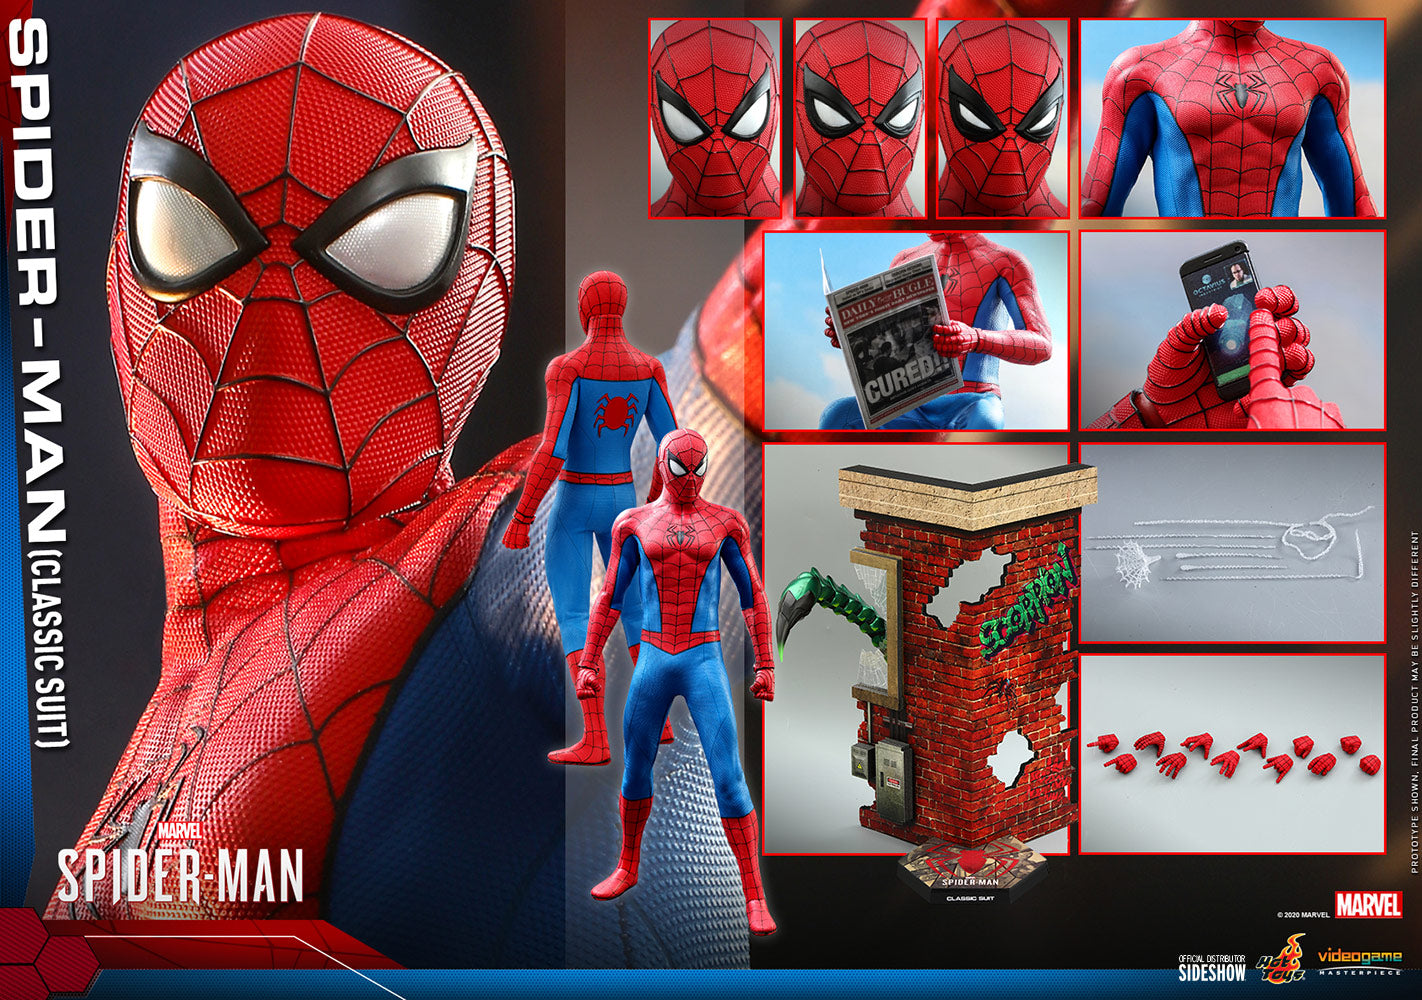 Hot Toys on X: #HotToys 1/6th scale #SpiderMan (Advanced Suit) collectible  figure from #Marvel's Spider-Man is available for pre-order now!    / X